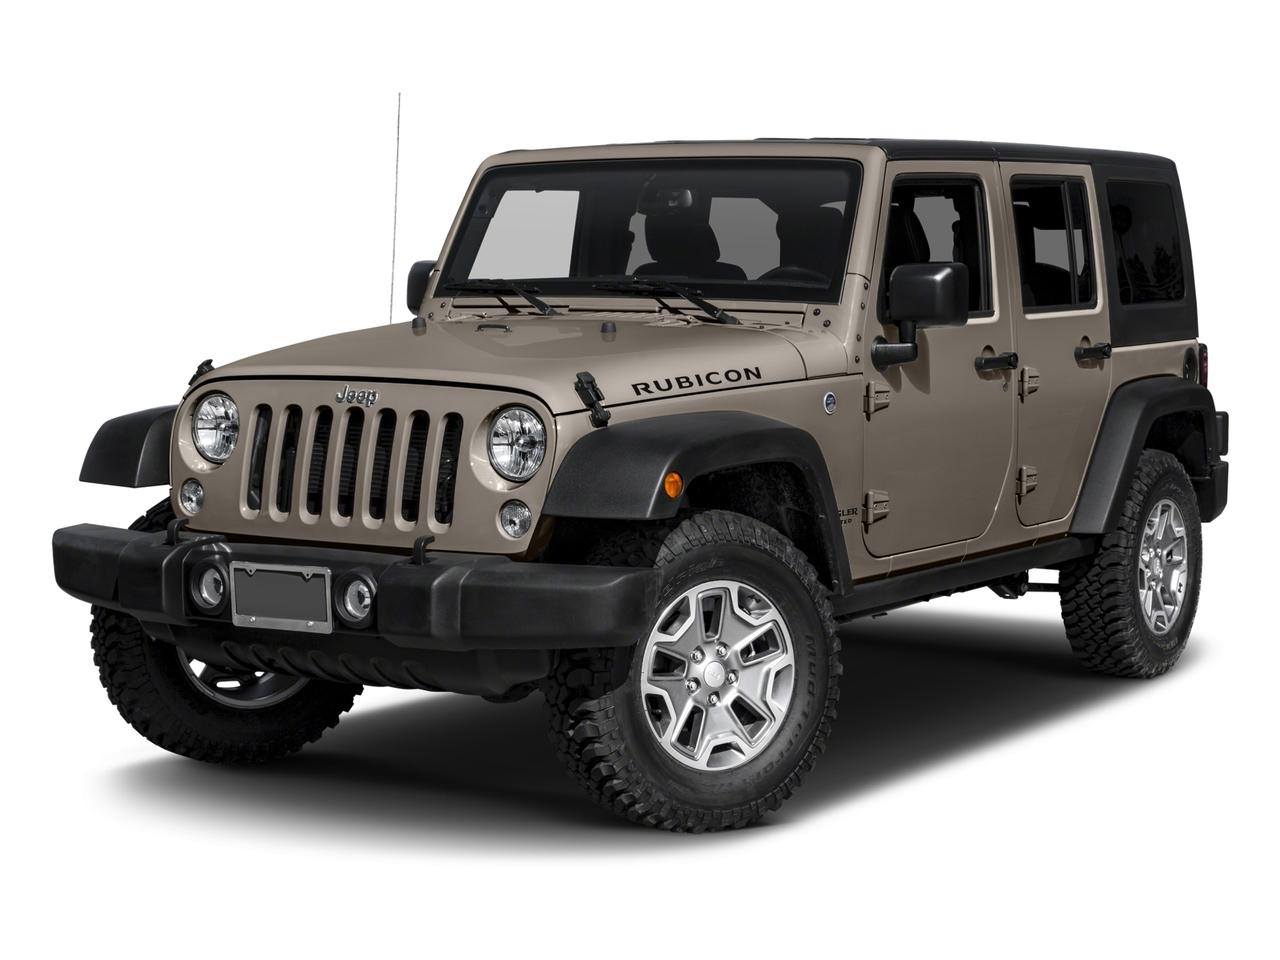 JASPER used, certified Jeep Vehicles for Sale